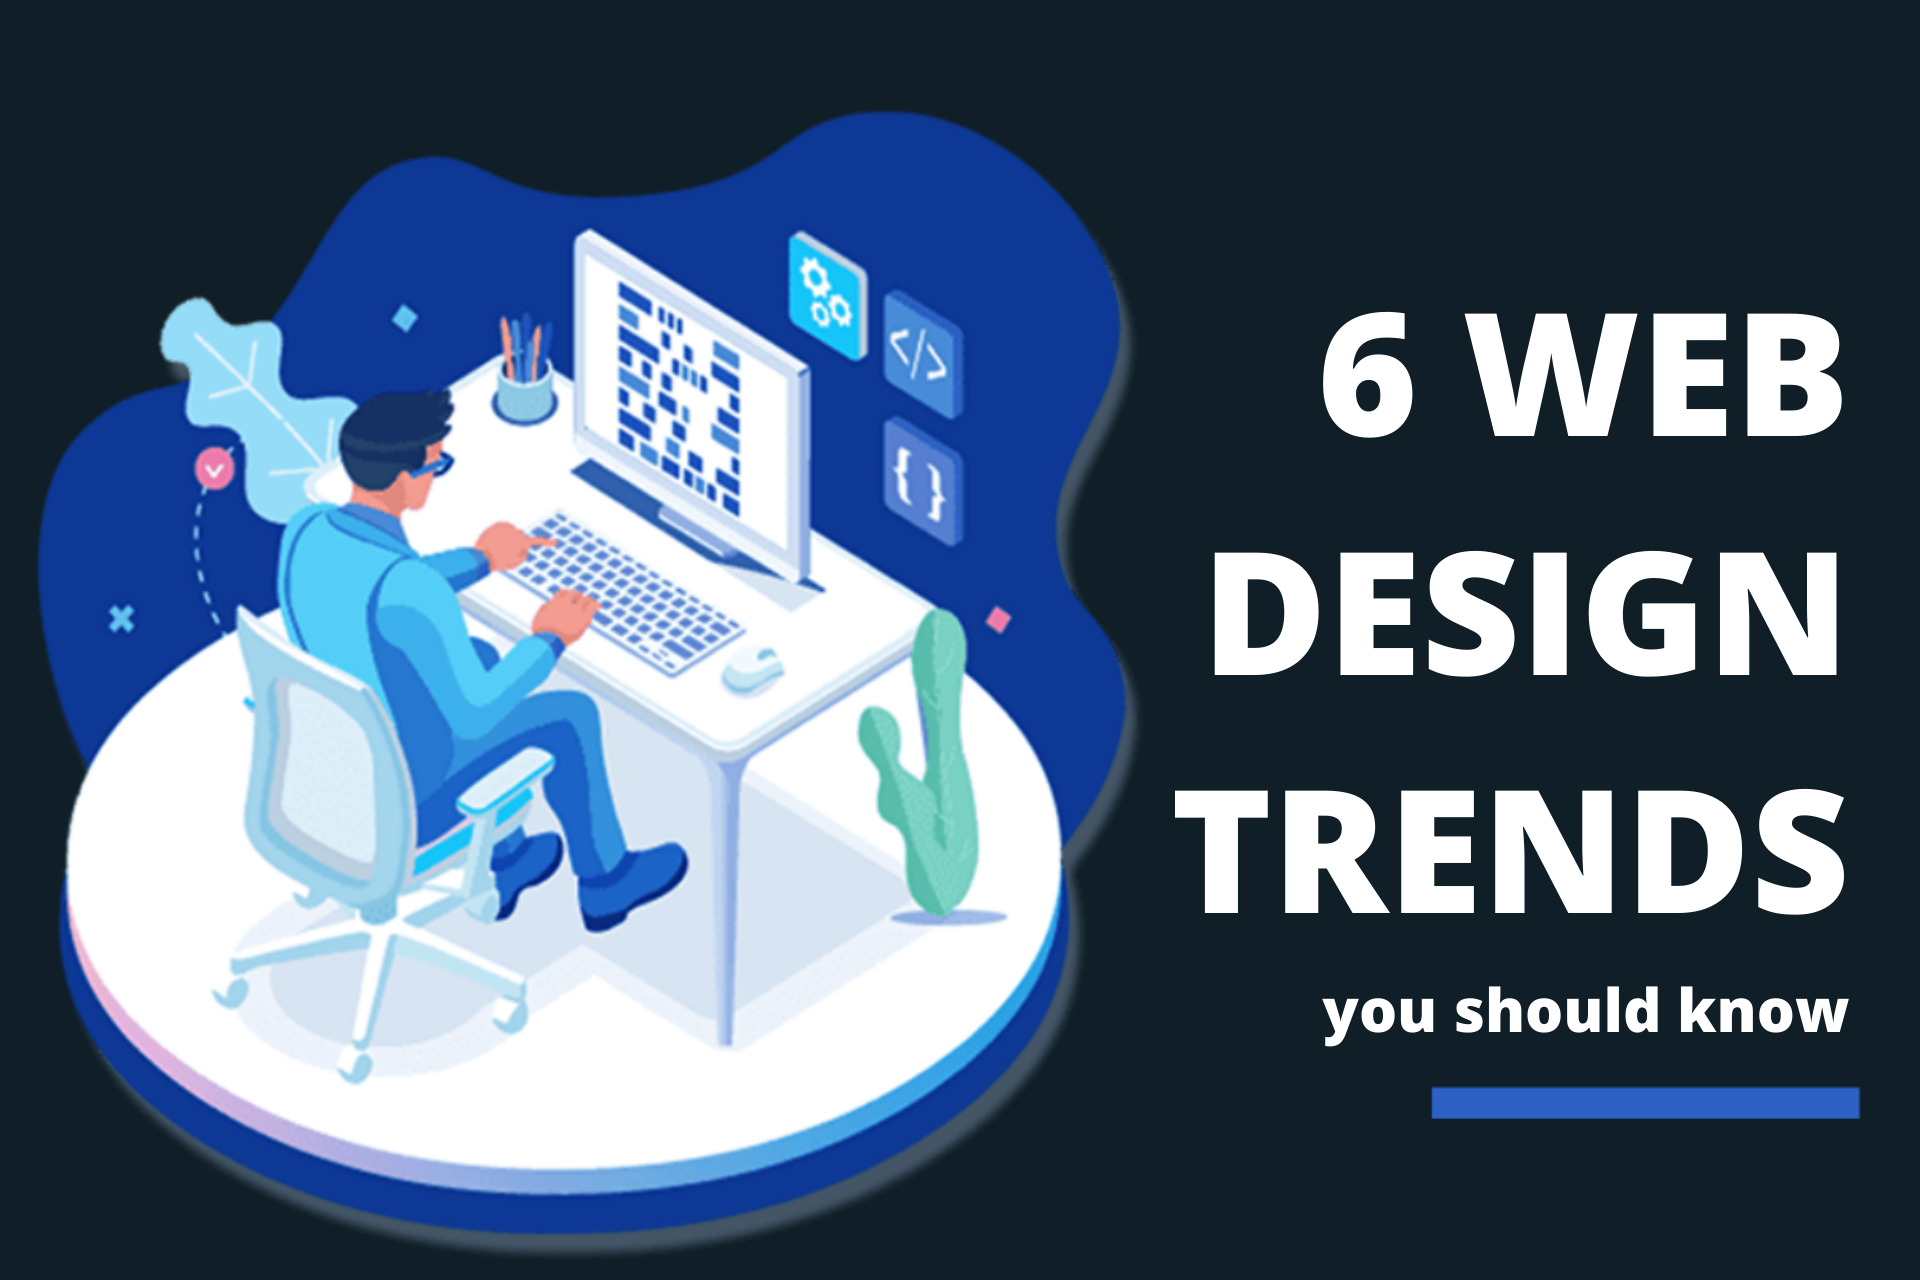 Top Web Design Trends and Designing for Your Audience